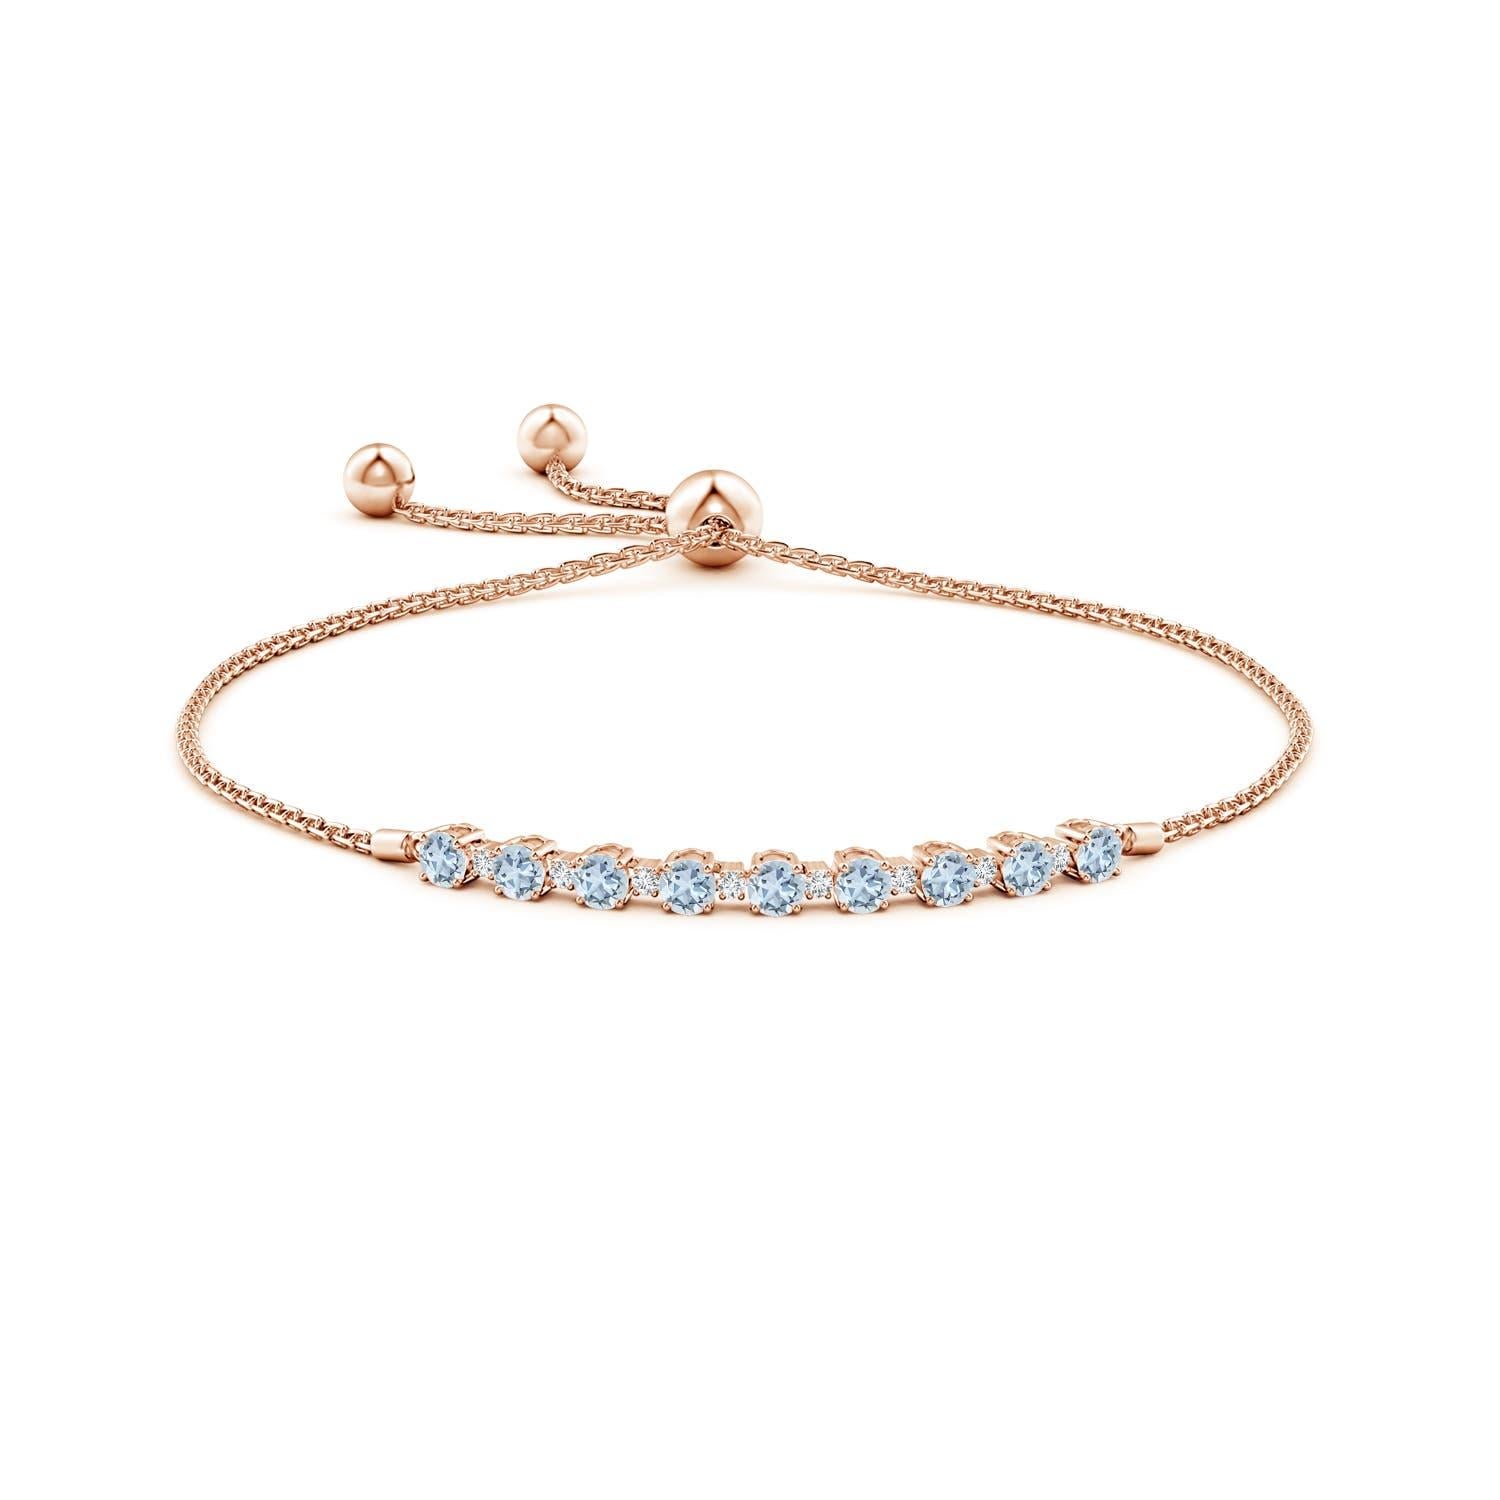 Sea blue aquamarines and glittering diamonds come together on this 14k rose gold tennis bolo bracelet. They are prong set alternately and create a classic look. This bracelet is adjustable to fit most wrists.